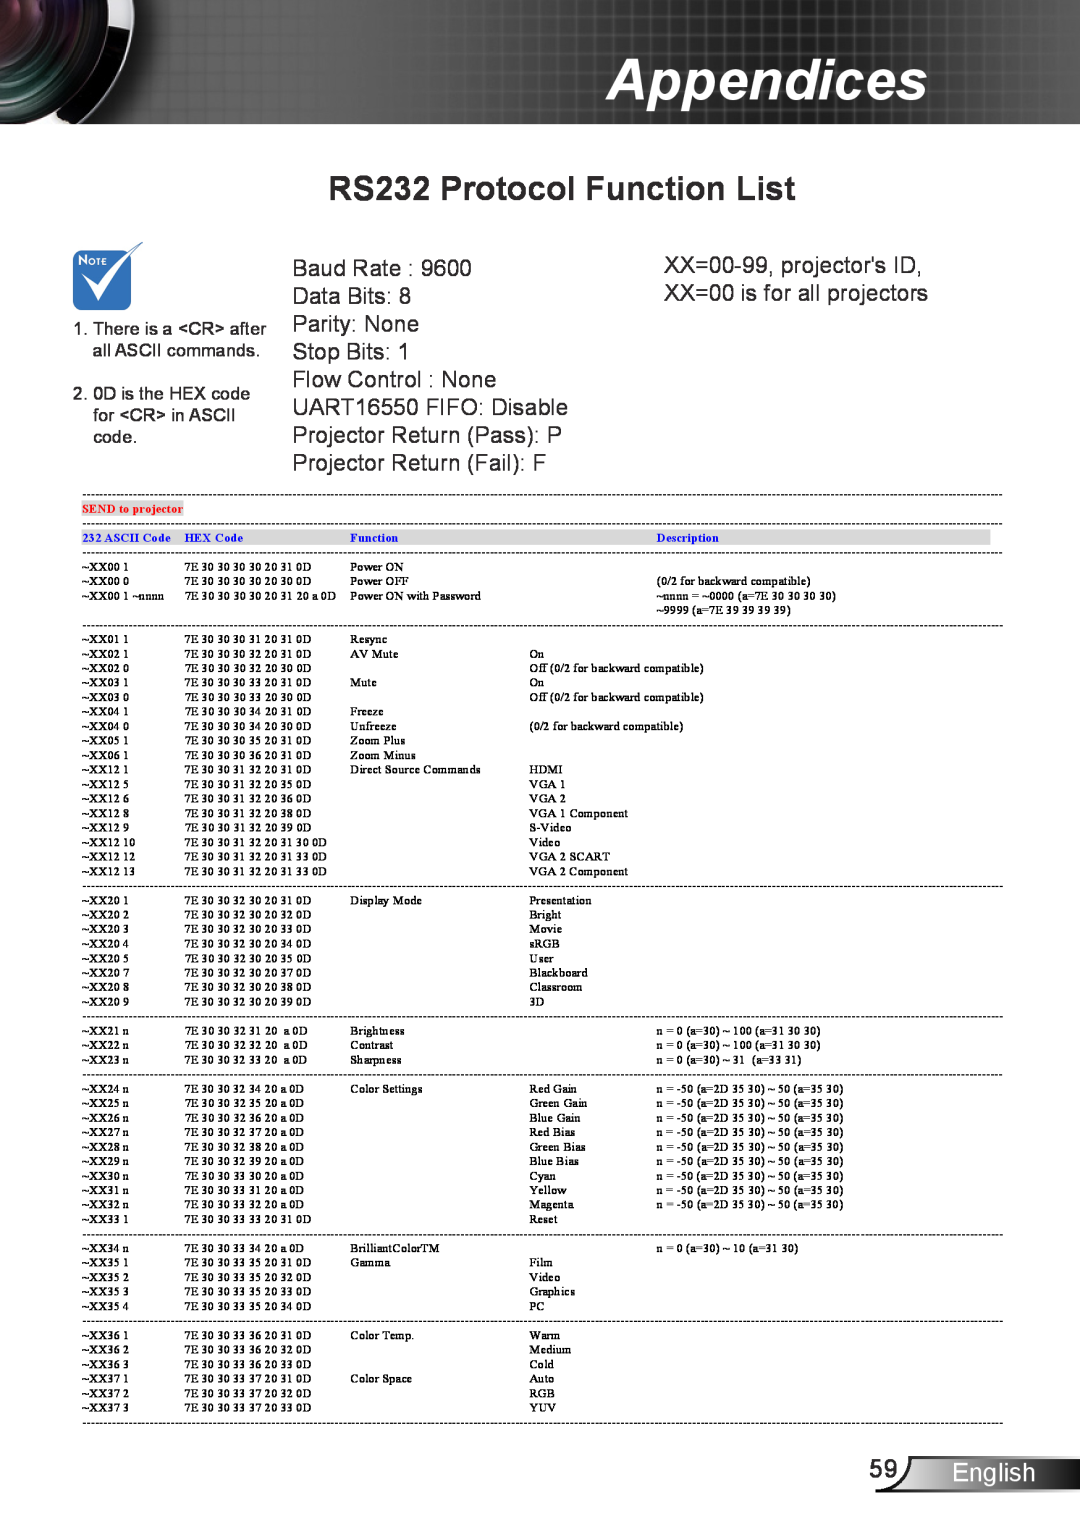 Optoma Technology TW762GOV manual RS232 Protocol Function List, English, Appendices, There is a CR after all ASCII commands 